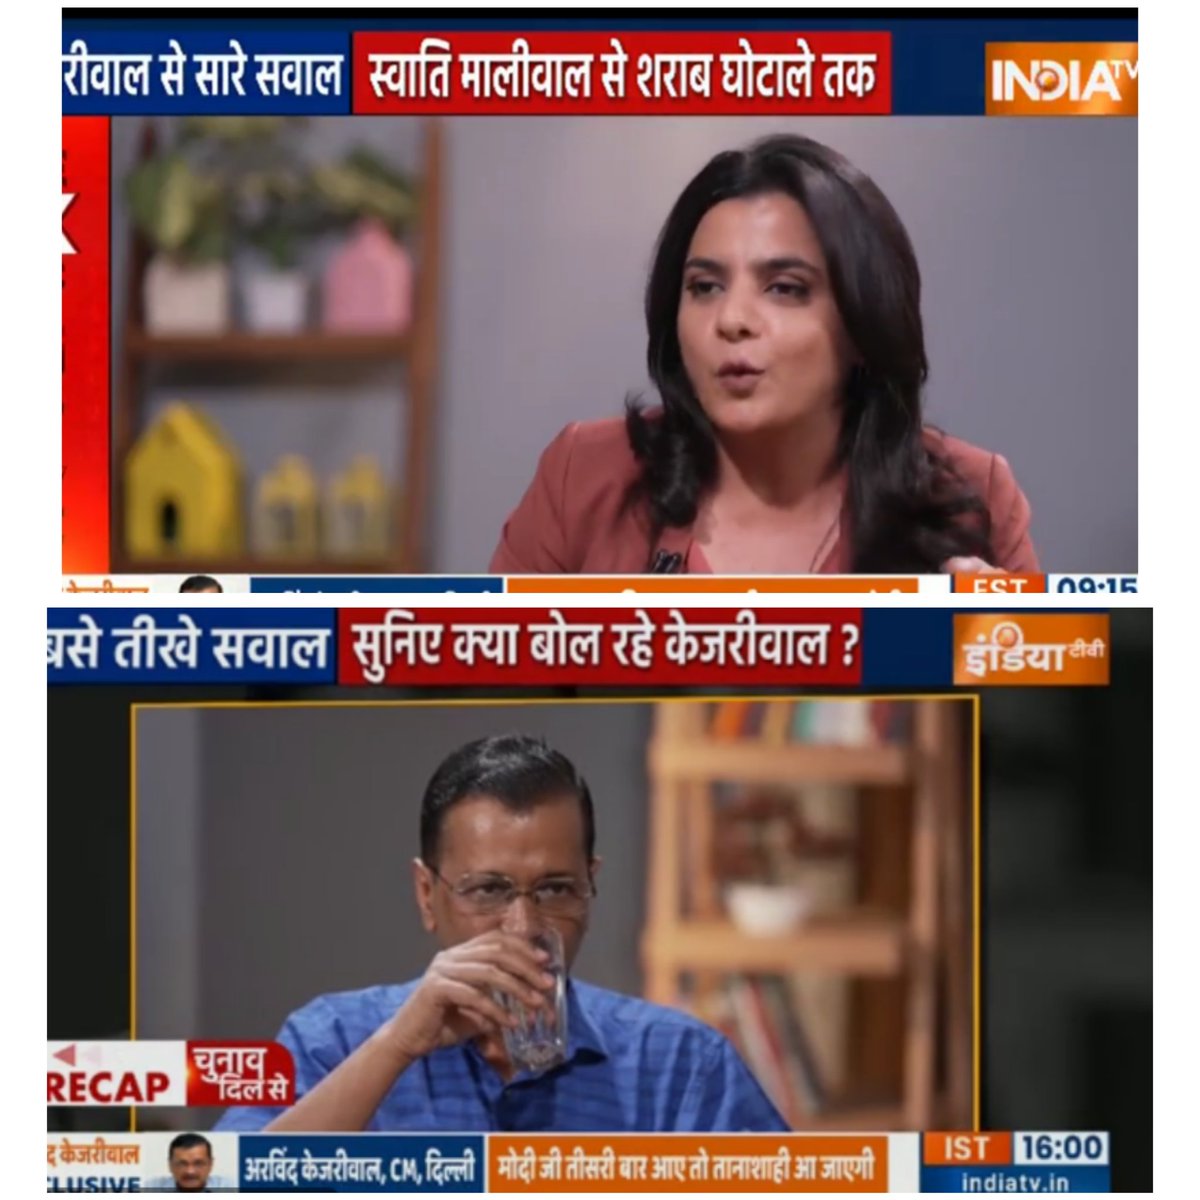 INDI alliance supporters/Karan Thapar fans believe that drinking water during an interview indicates that the guest is rattled...